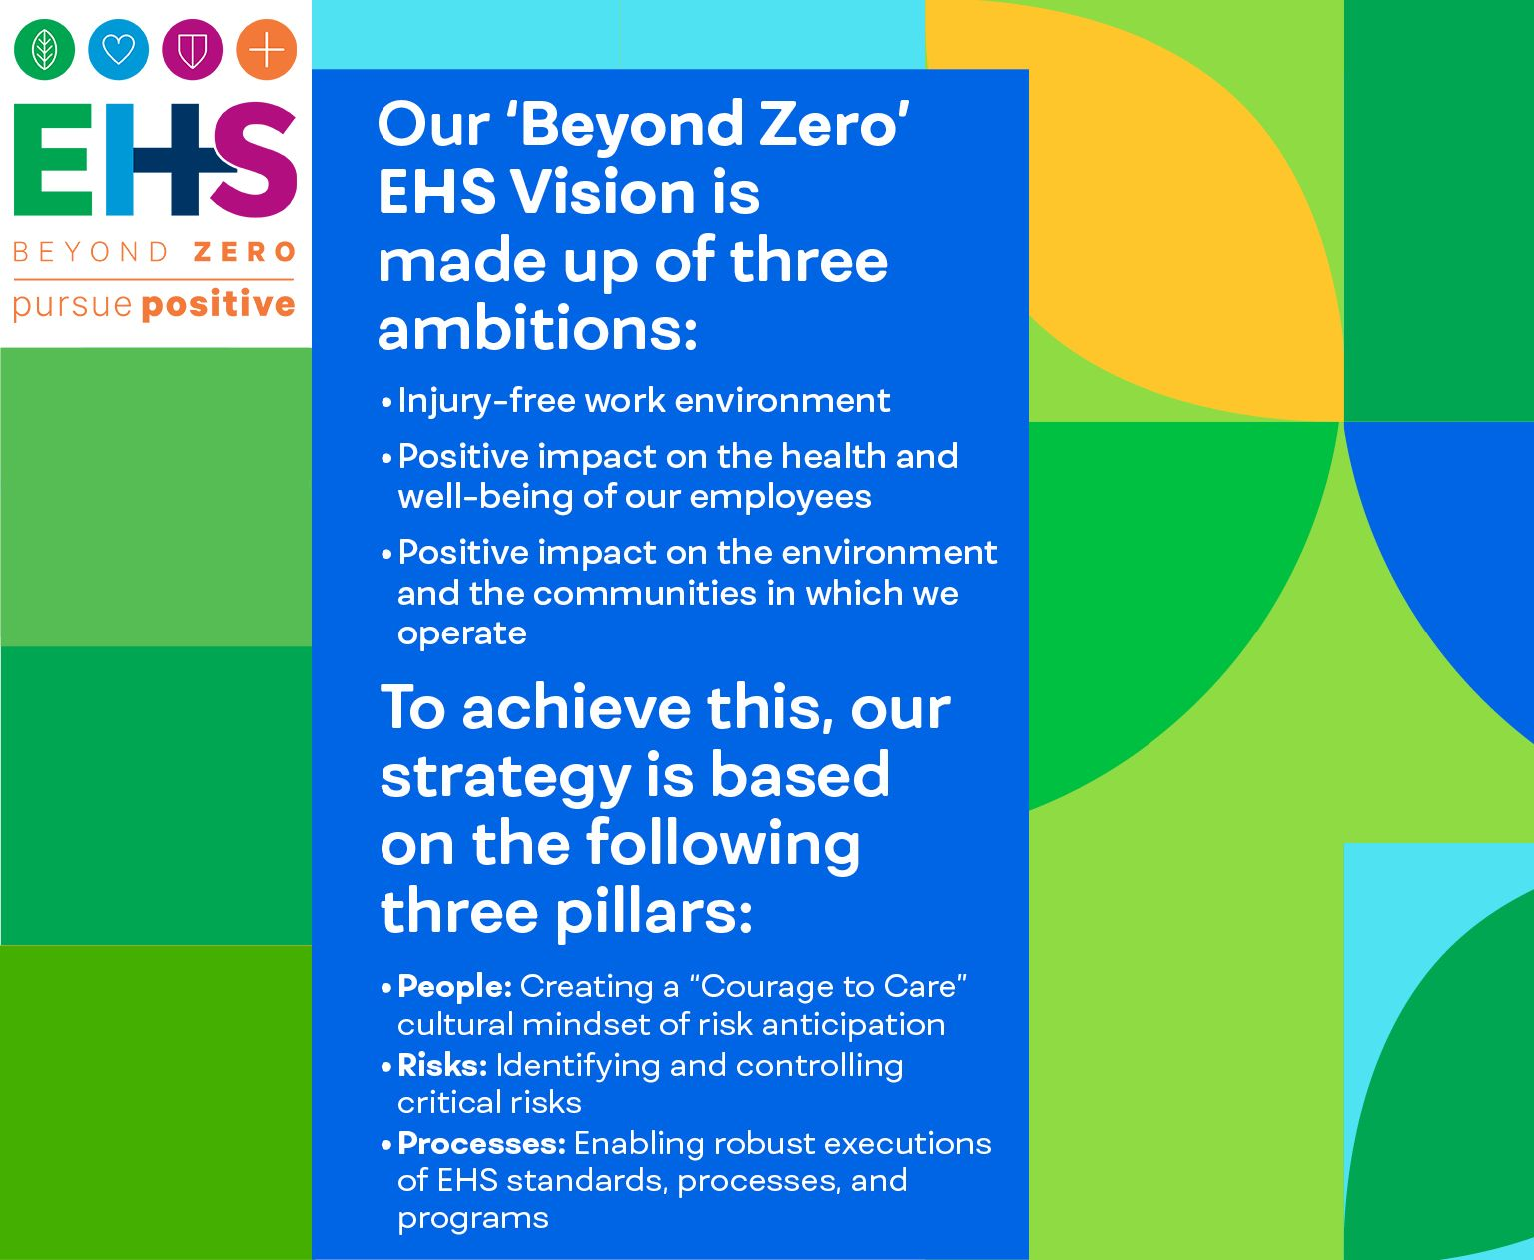 3 pillars of ‘Beyond Zero’ EHS Vision strategy: People (Creating “Courage to Care” cultural mindset of risk anticipation); Risks (Identifying & controlling critical risks); Processes (Enabling robust executions of EHS standards, processes, & programs).